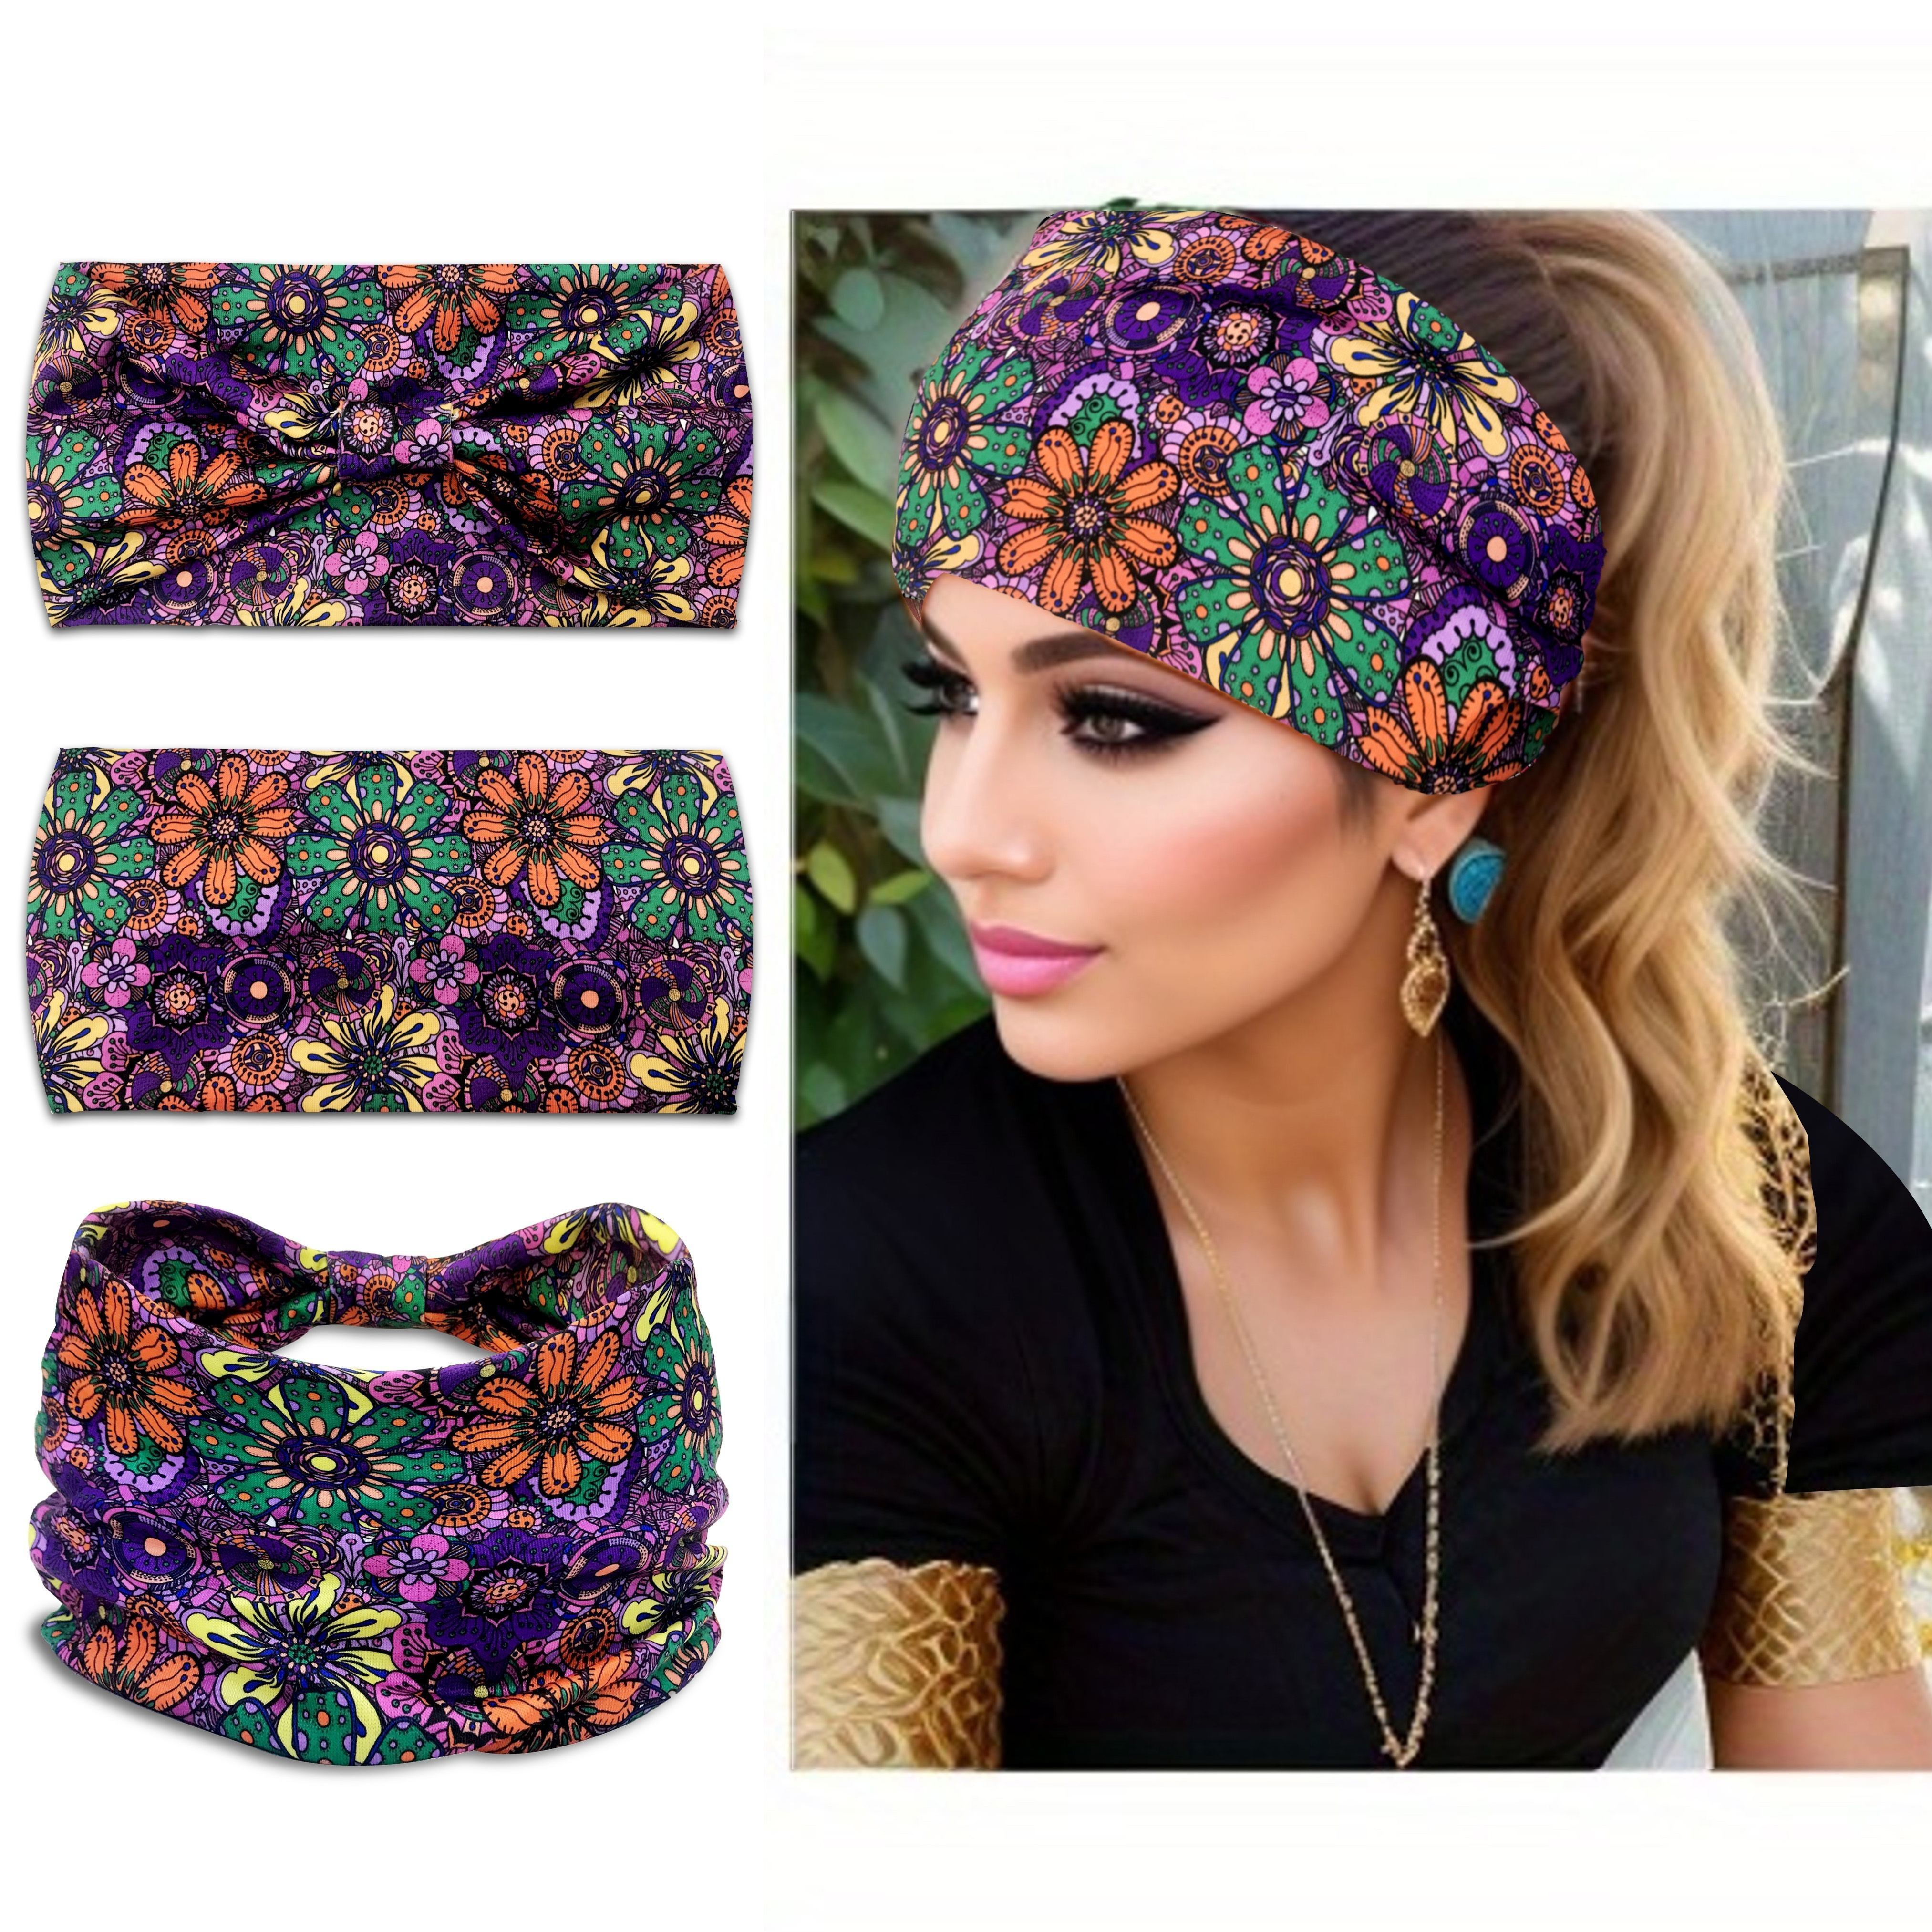 

Bohemian Style Floral Printed Wide Headband, Elastic Non-slip Knotted Hairband, Versatile Fashion Hair Accessory For Women, Vibrant Colors